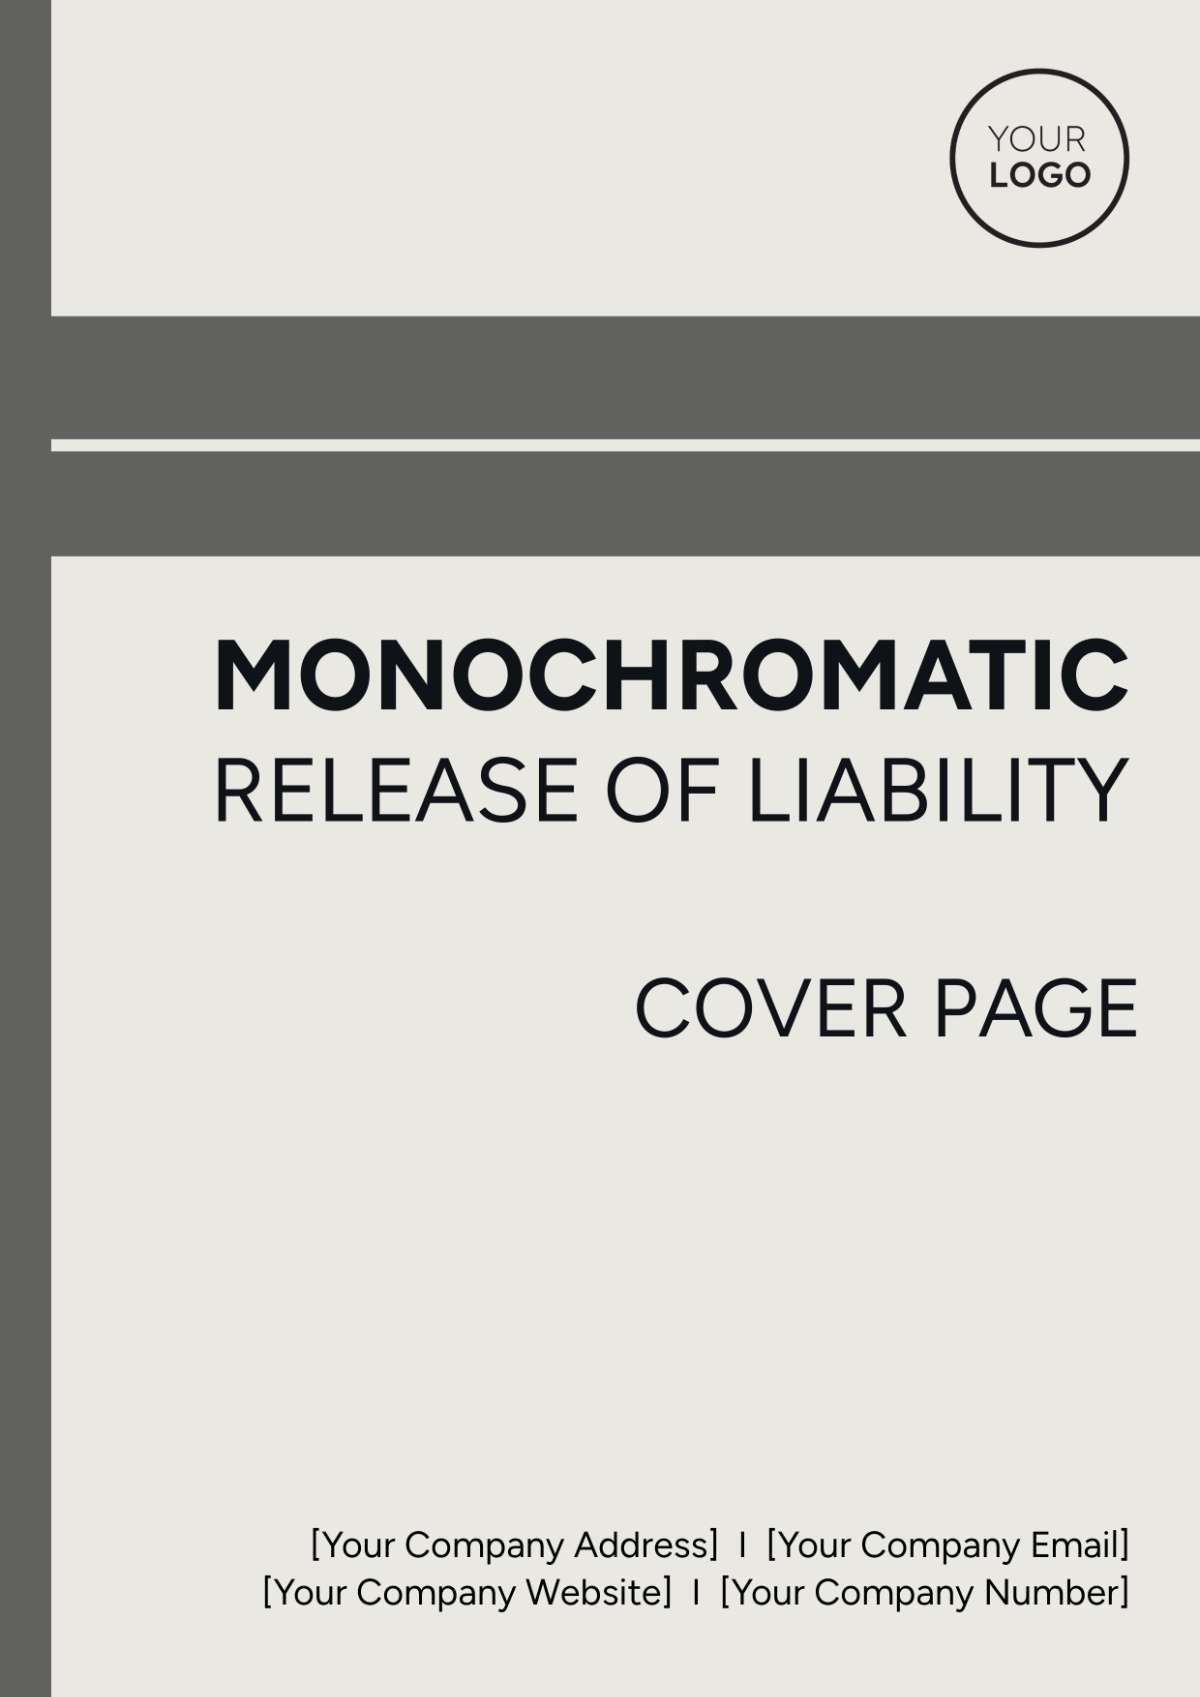 Monochromatic Release of Liability Cover Page